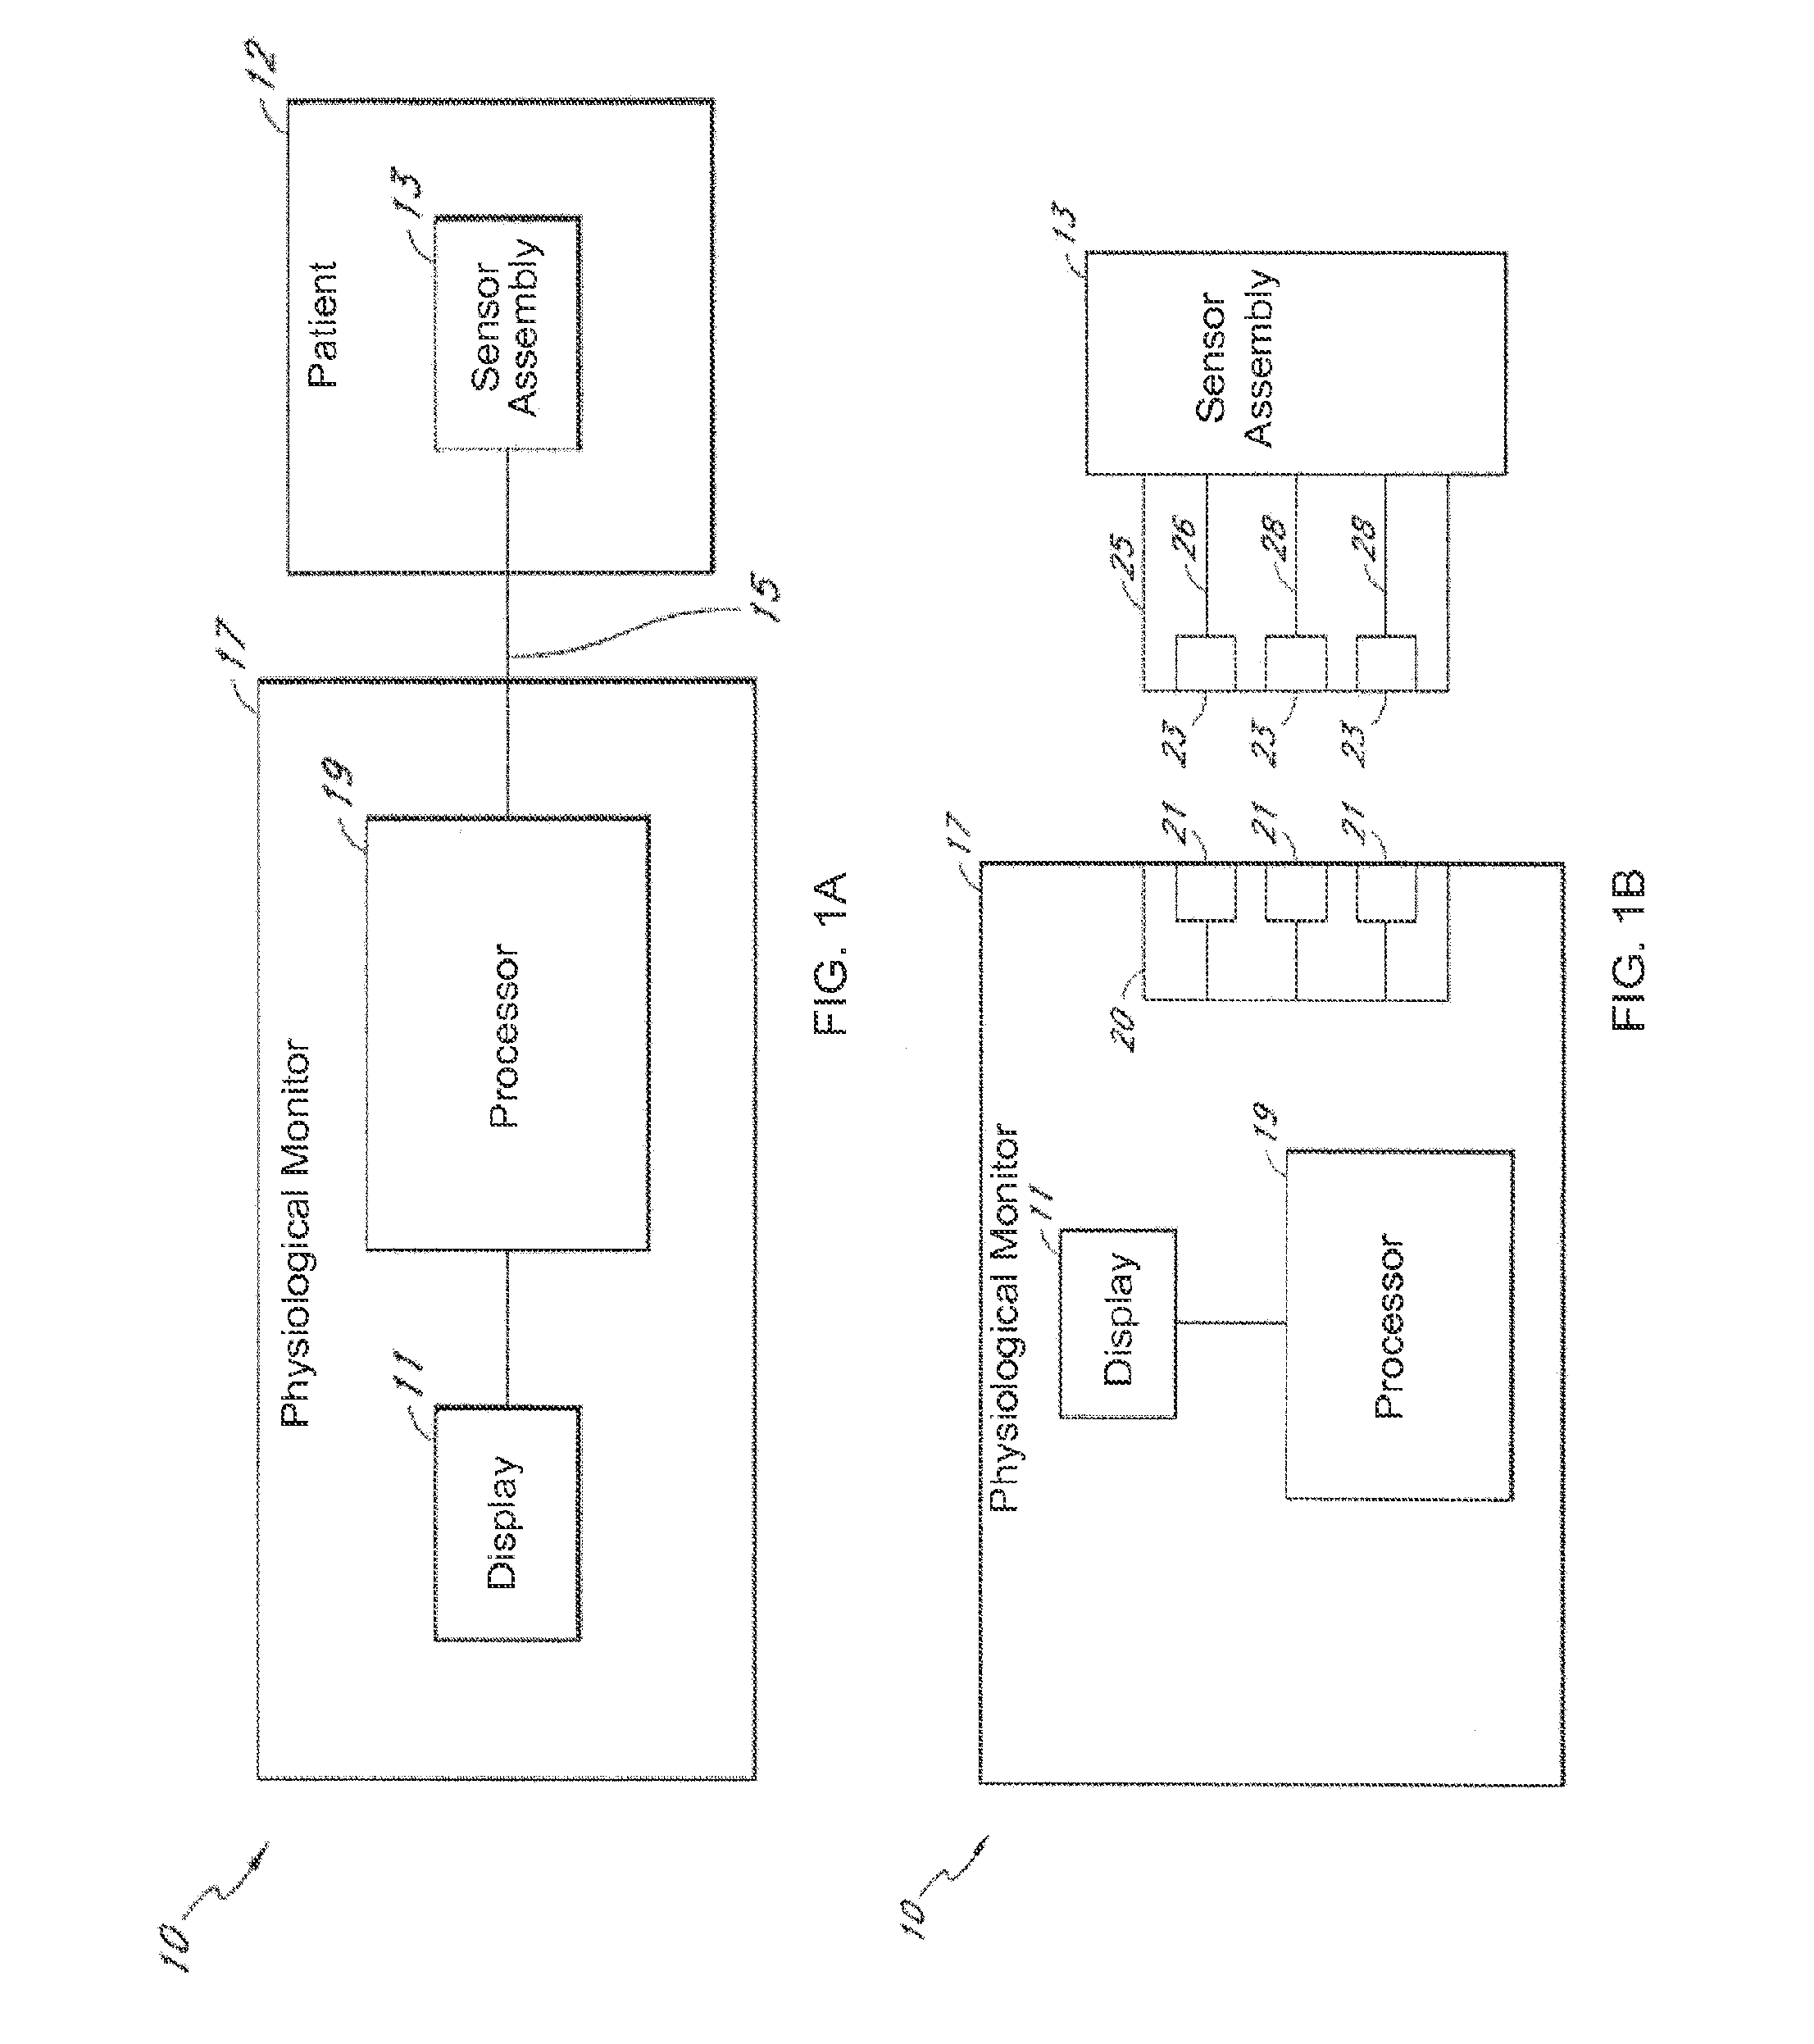 System and method for determining neural states from physiological measurements